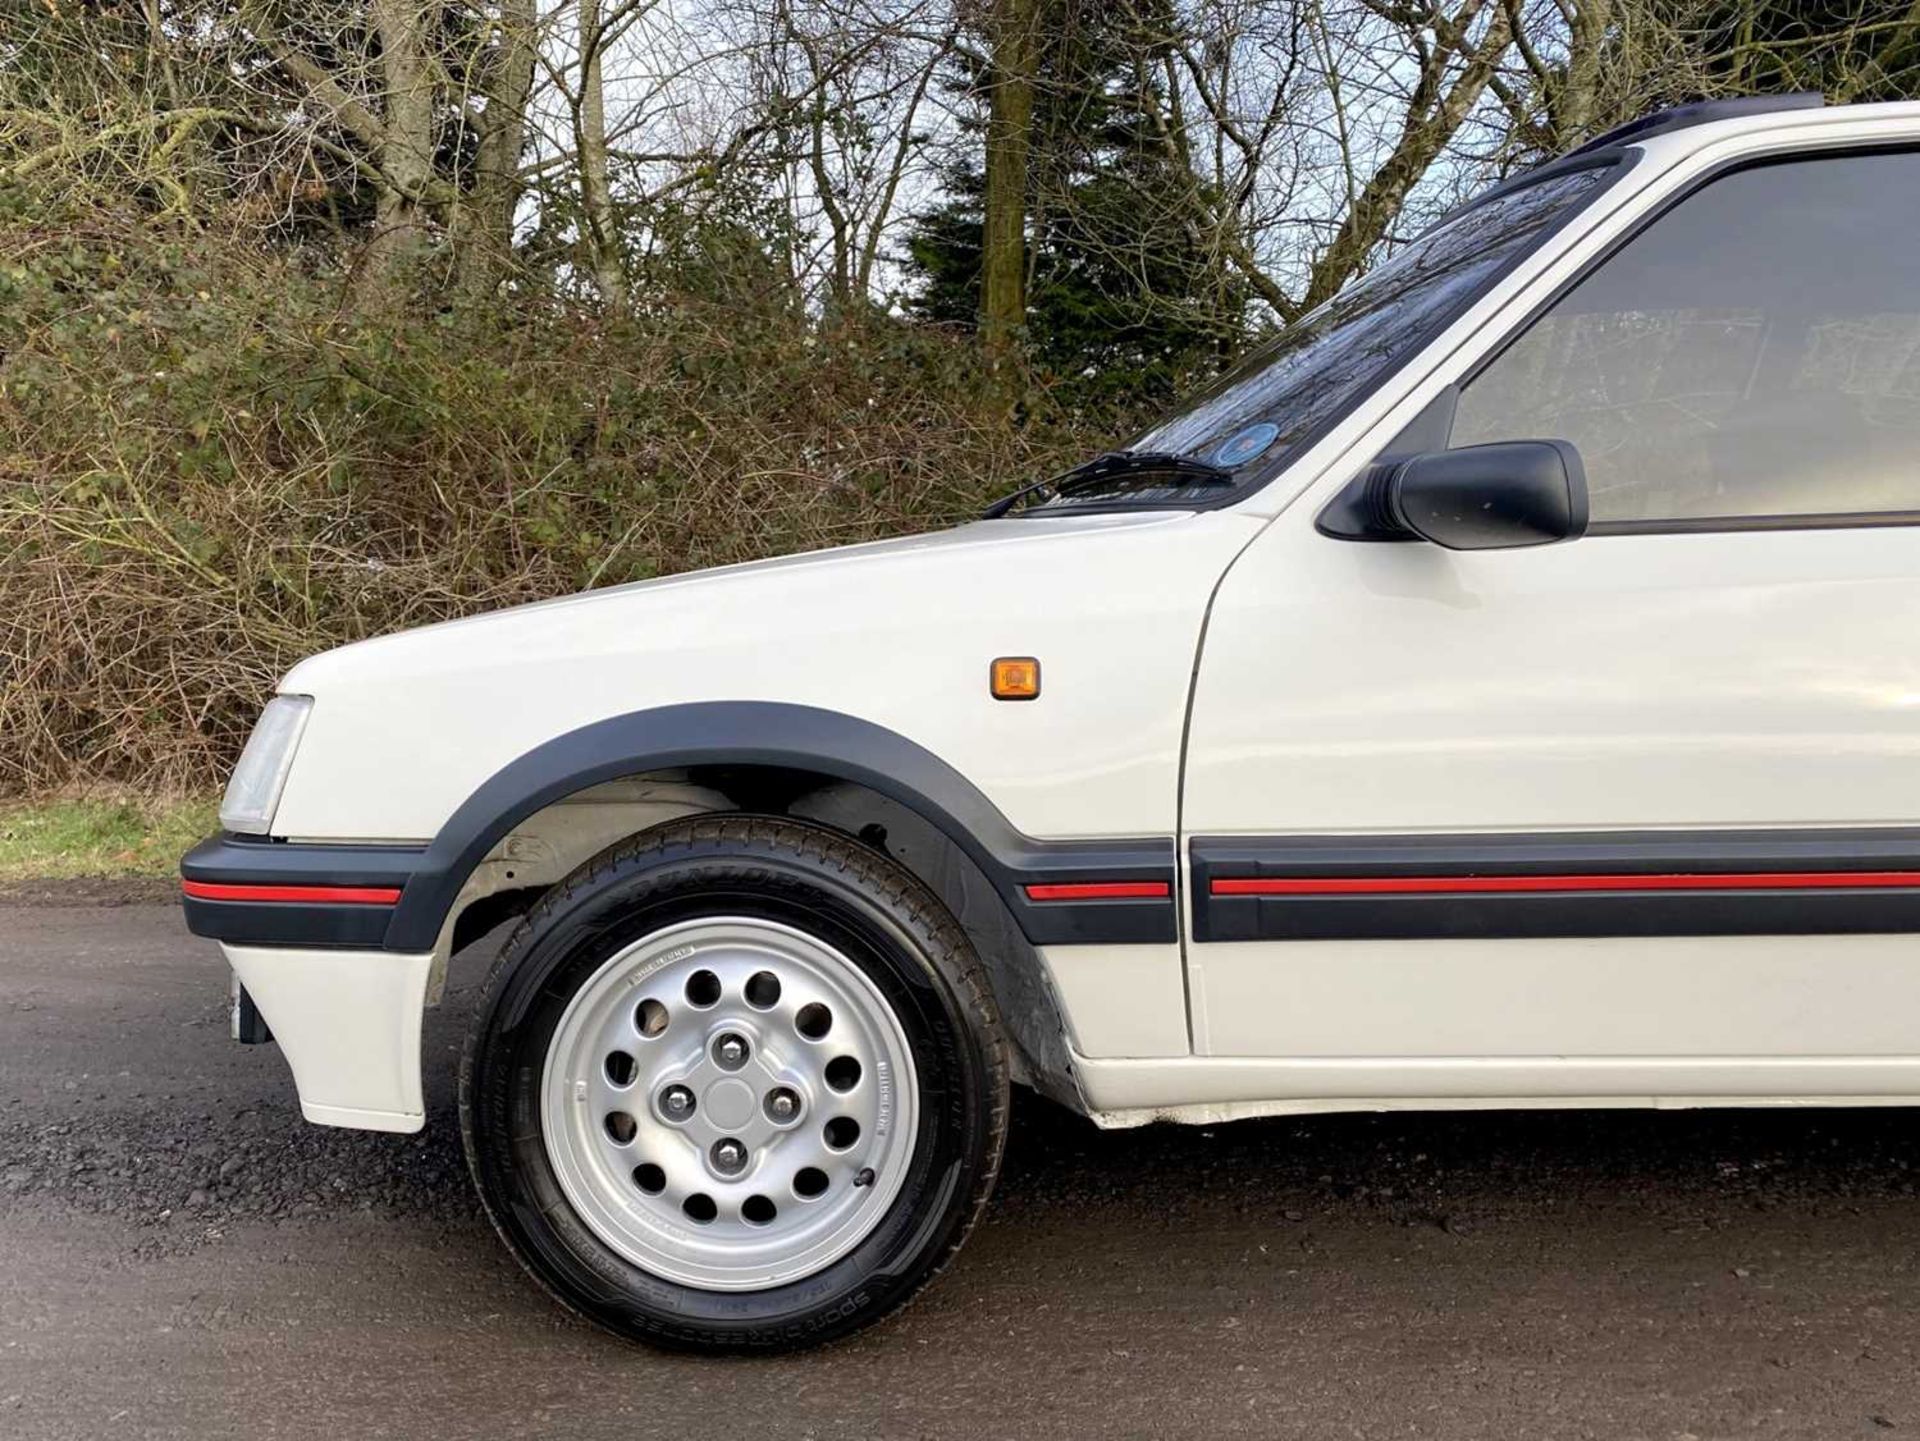 1990 Peugeot 205 GTi 1.6 Only 56,000 miles, same owner for 16 years - Image 48 of 81